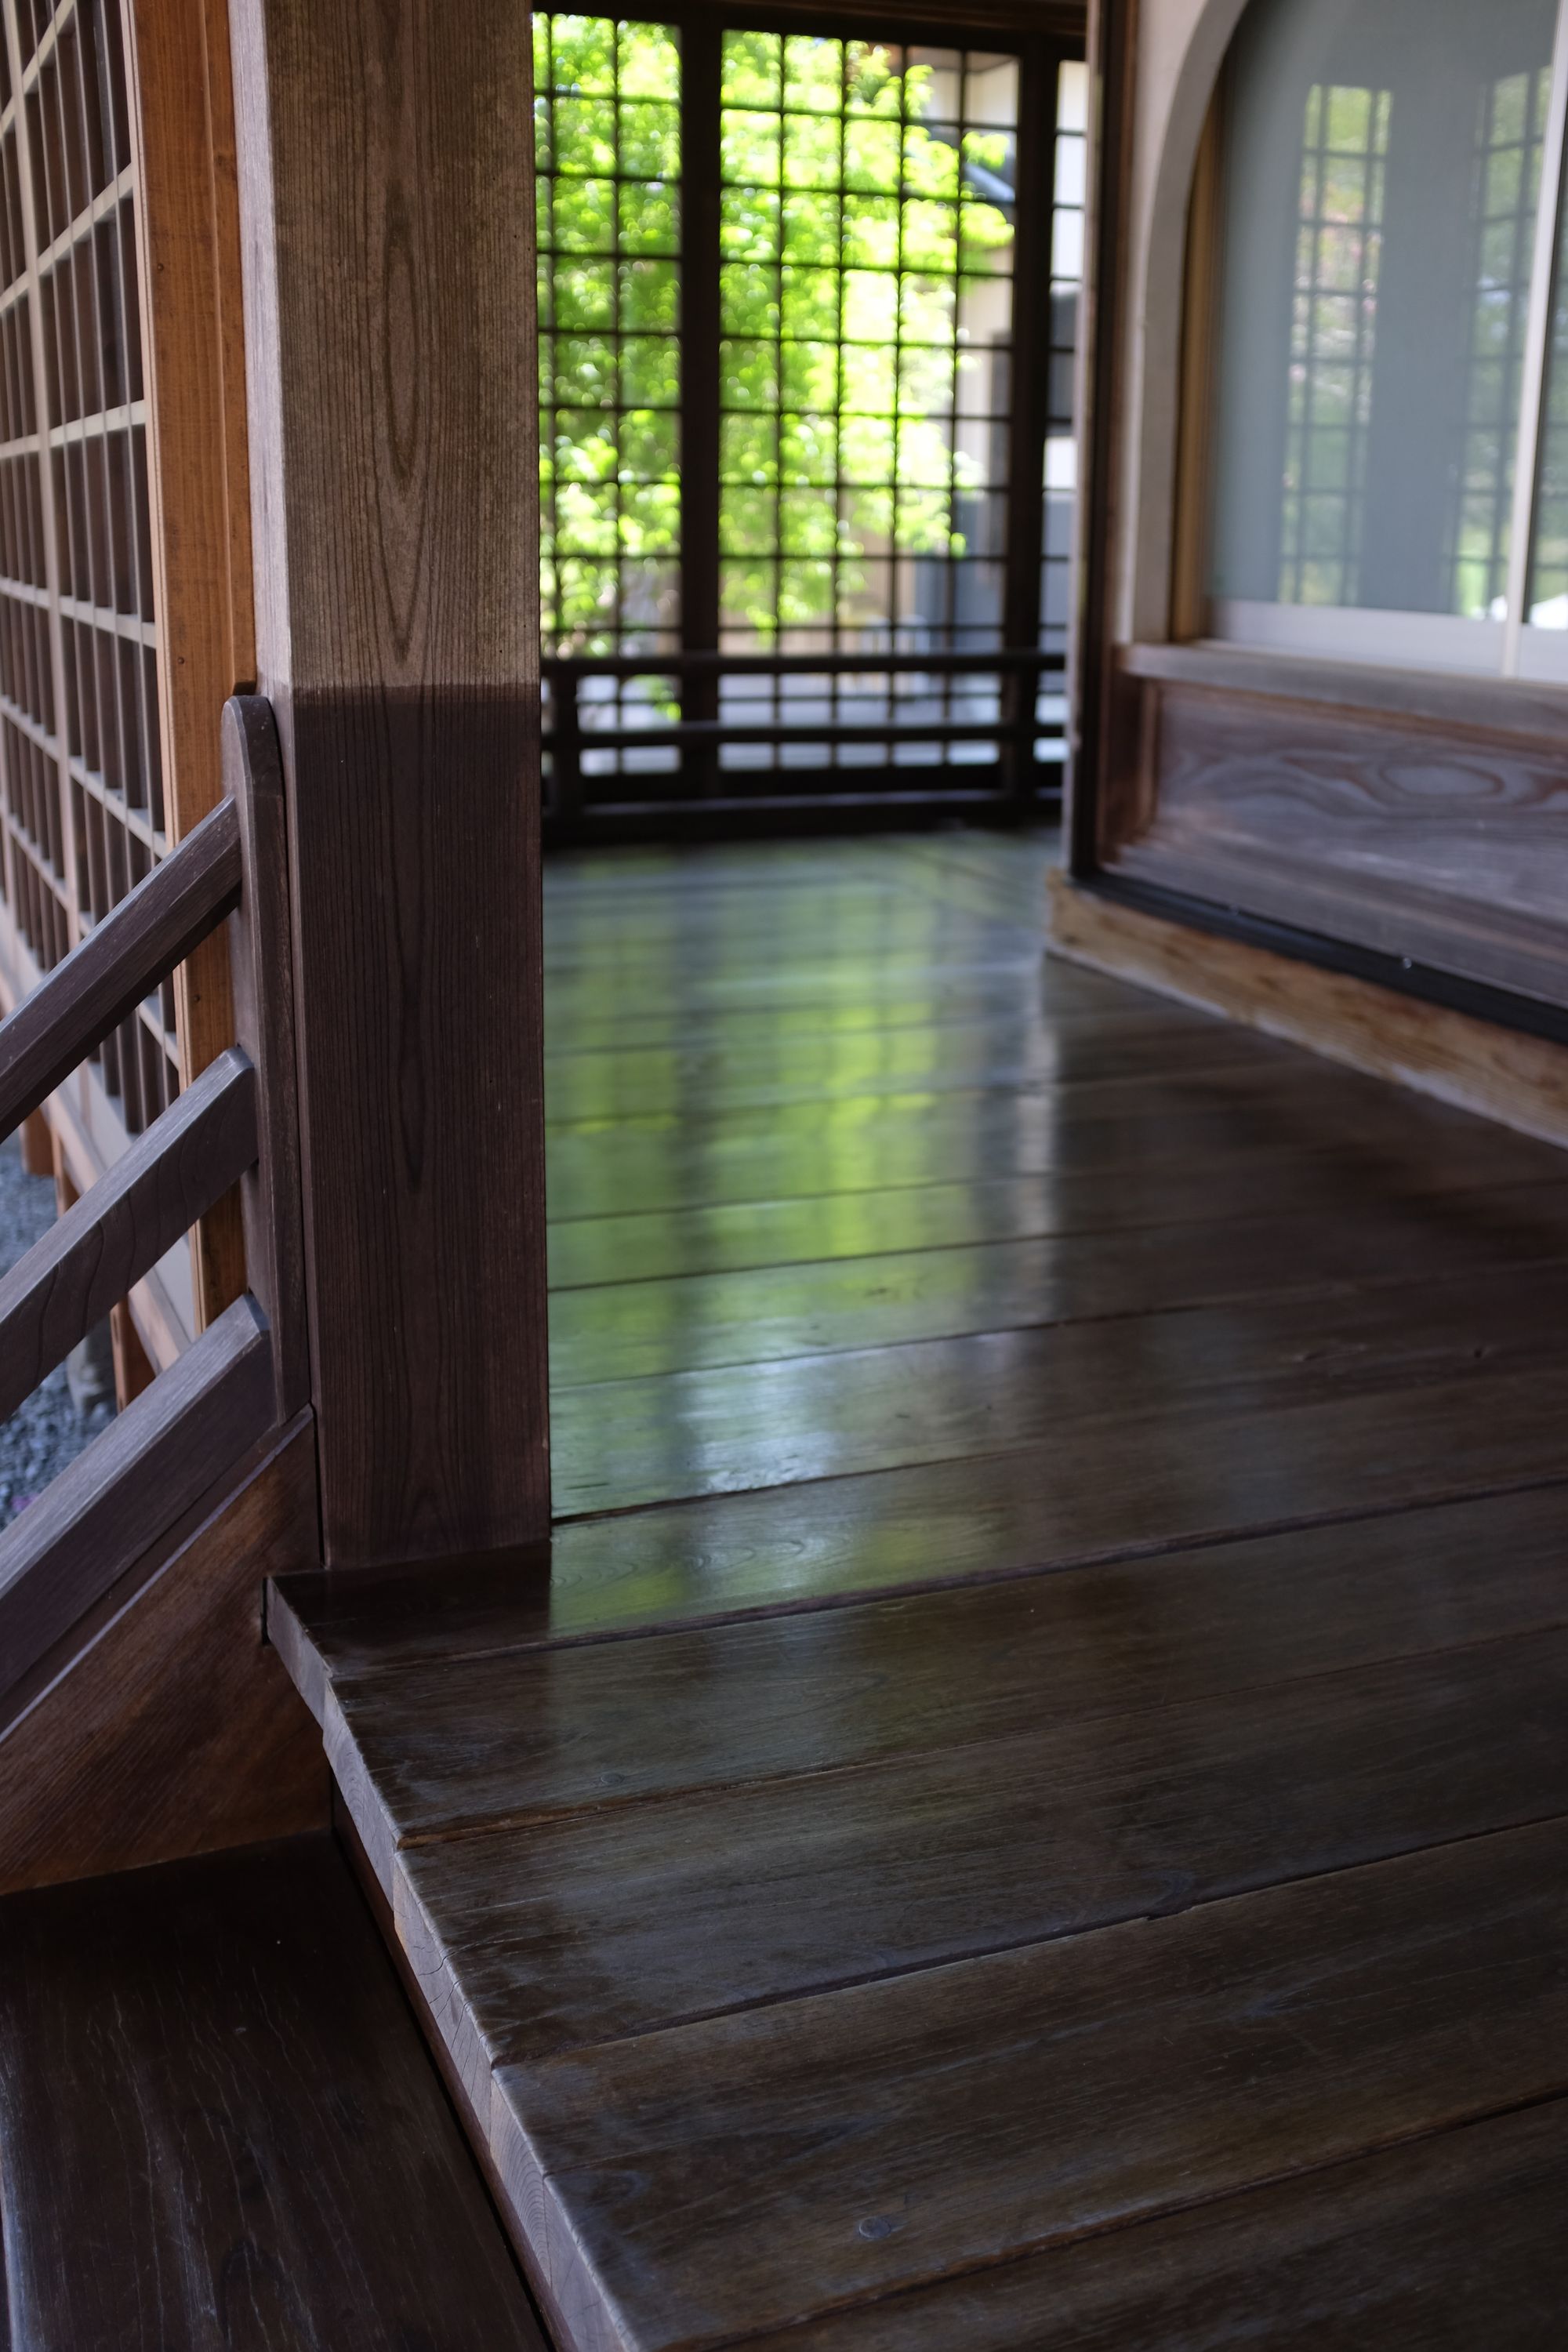 The polished wood floor of the porch of the temple.